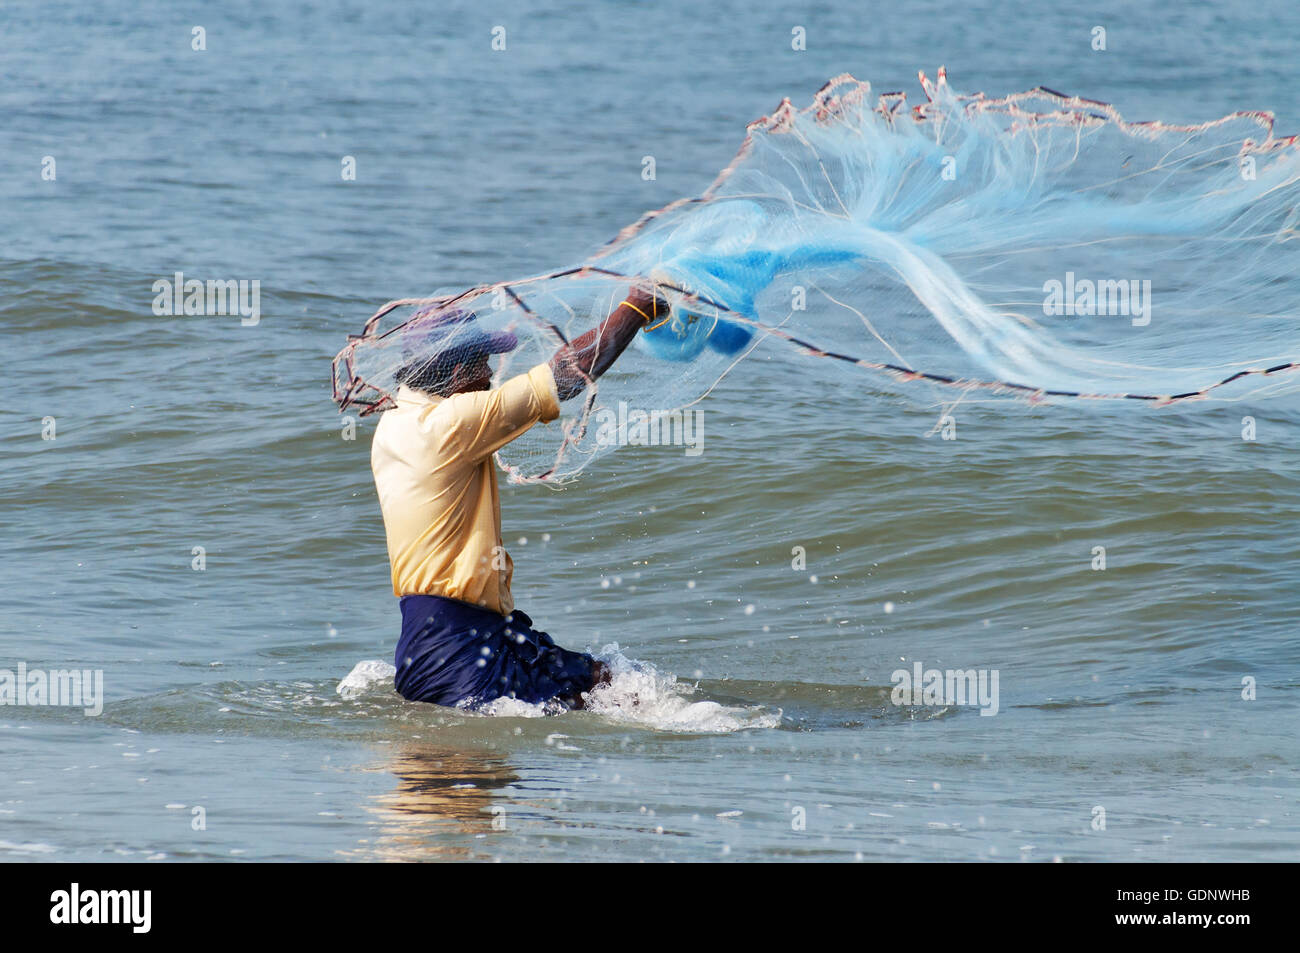 Unidentified Indian fisherman catch fish by throwing net Stock Photo - Alamy